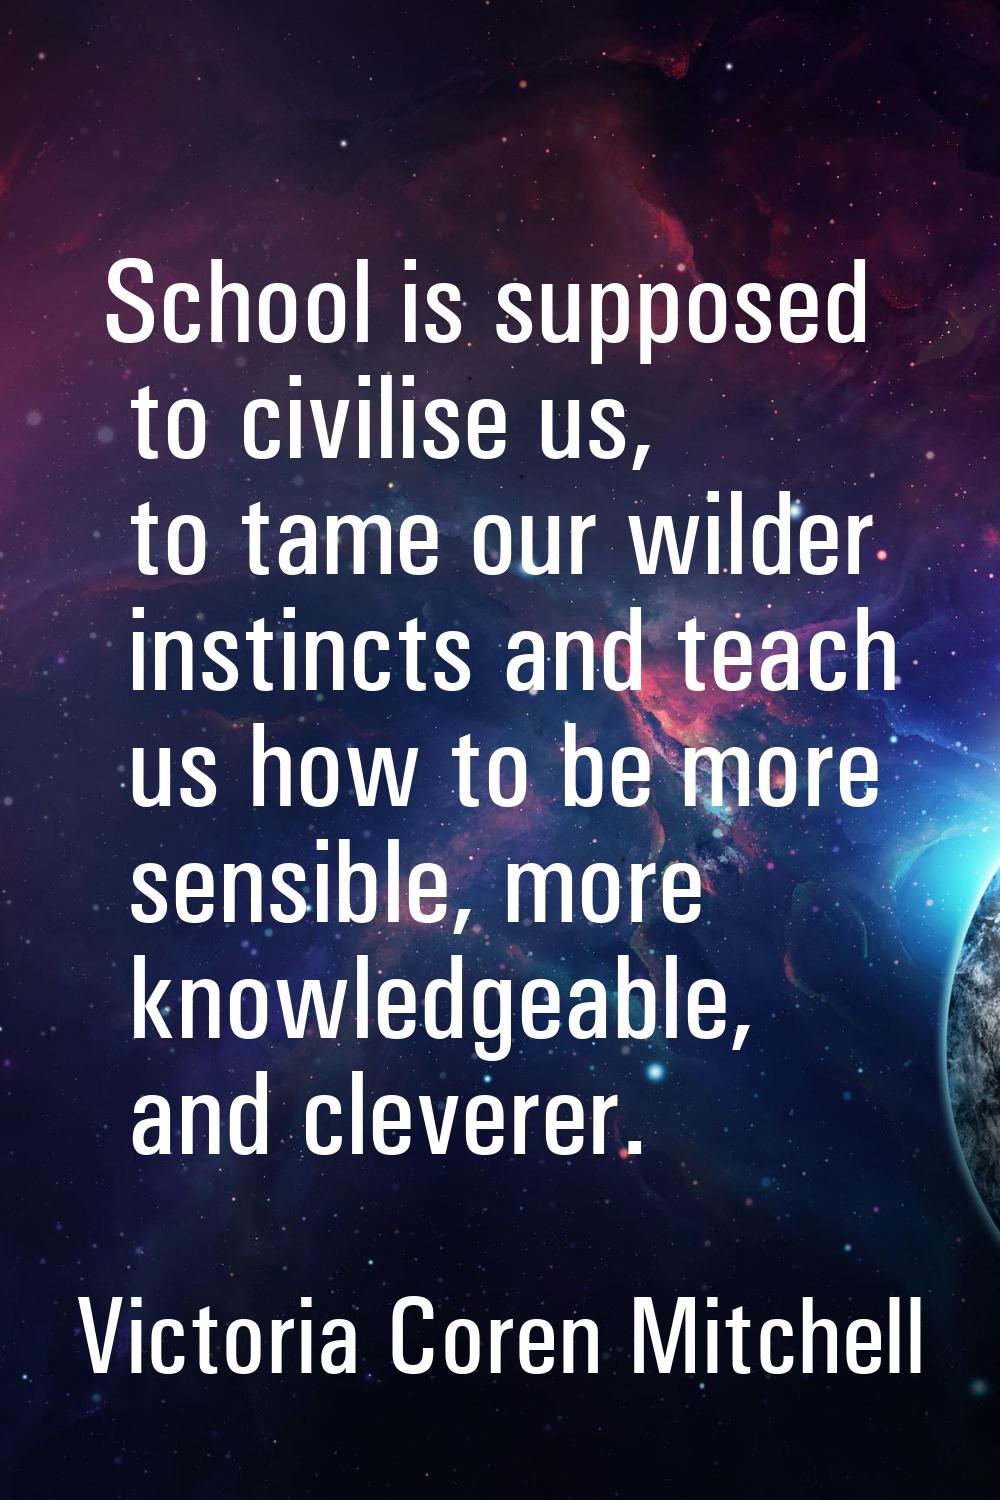 School is supposed to civilise us, to tame our wilder instincts and teach us how to be more sensibl